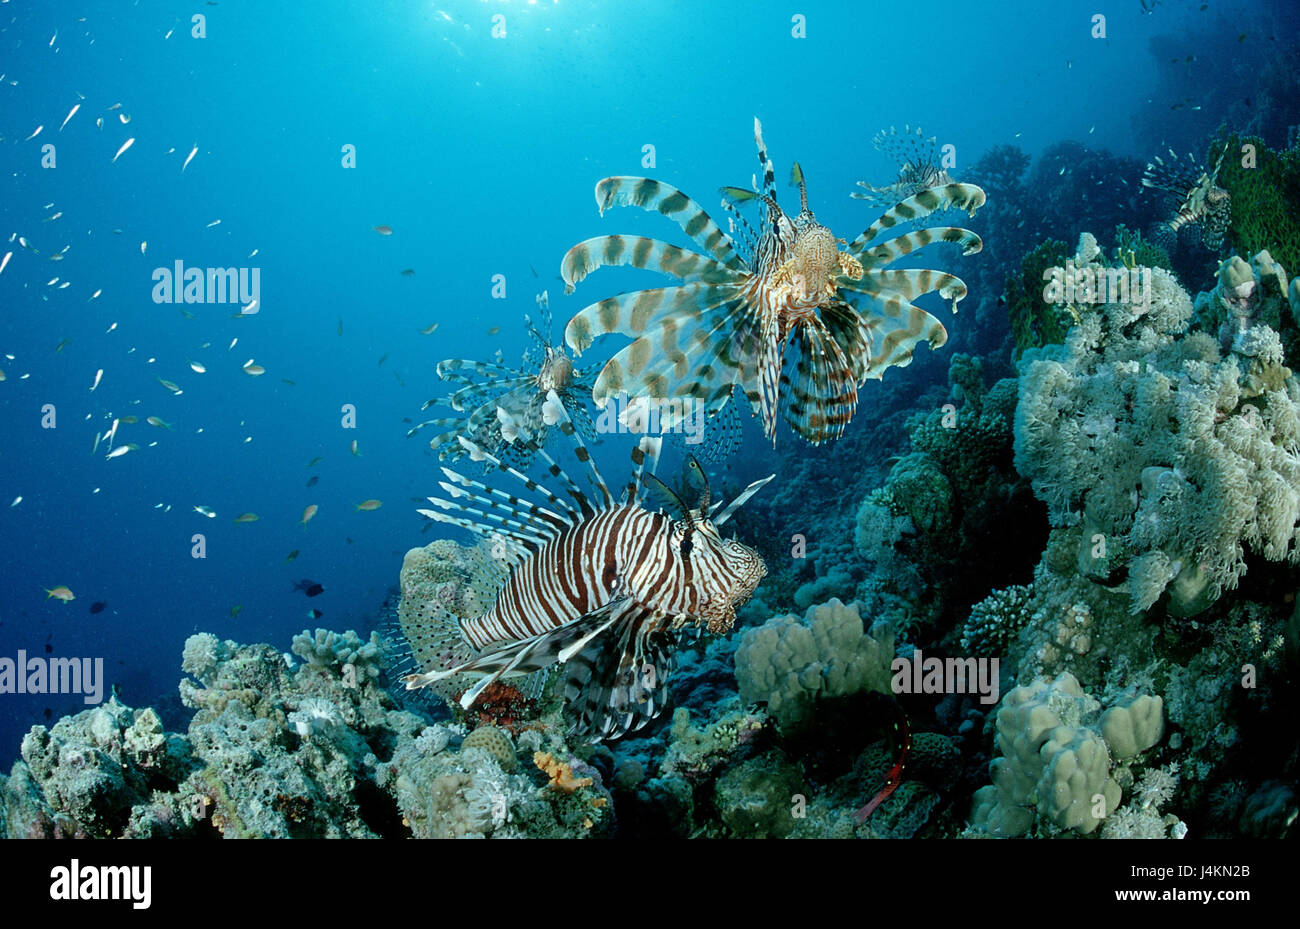 Red fire fish, Pterois volitans, coral reef, scorpion fishes, scorpion's fish, sea scorpions, Scorpaenidae, Stock Photo